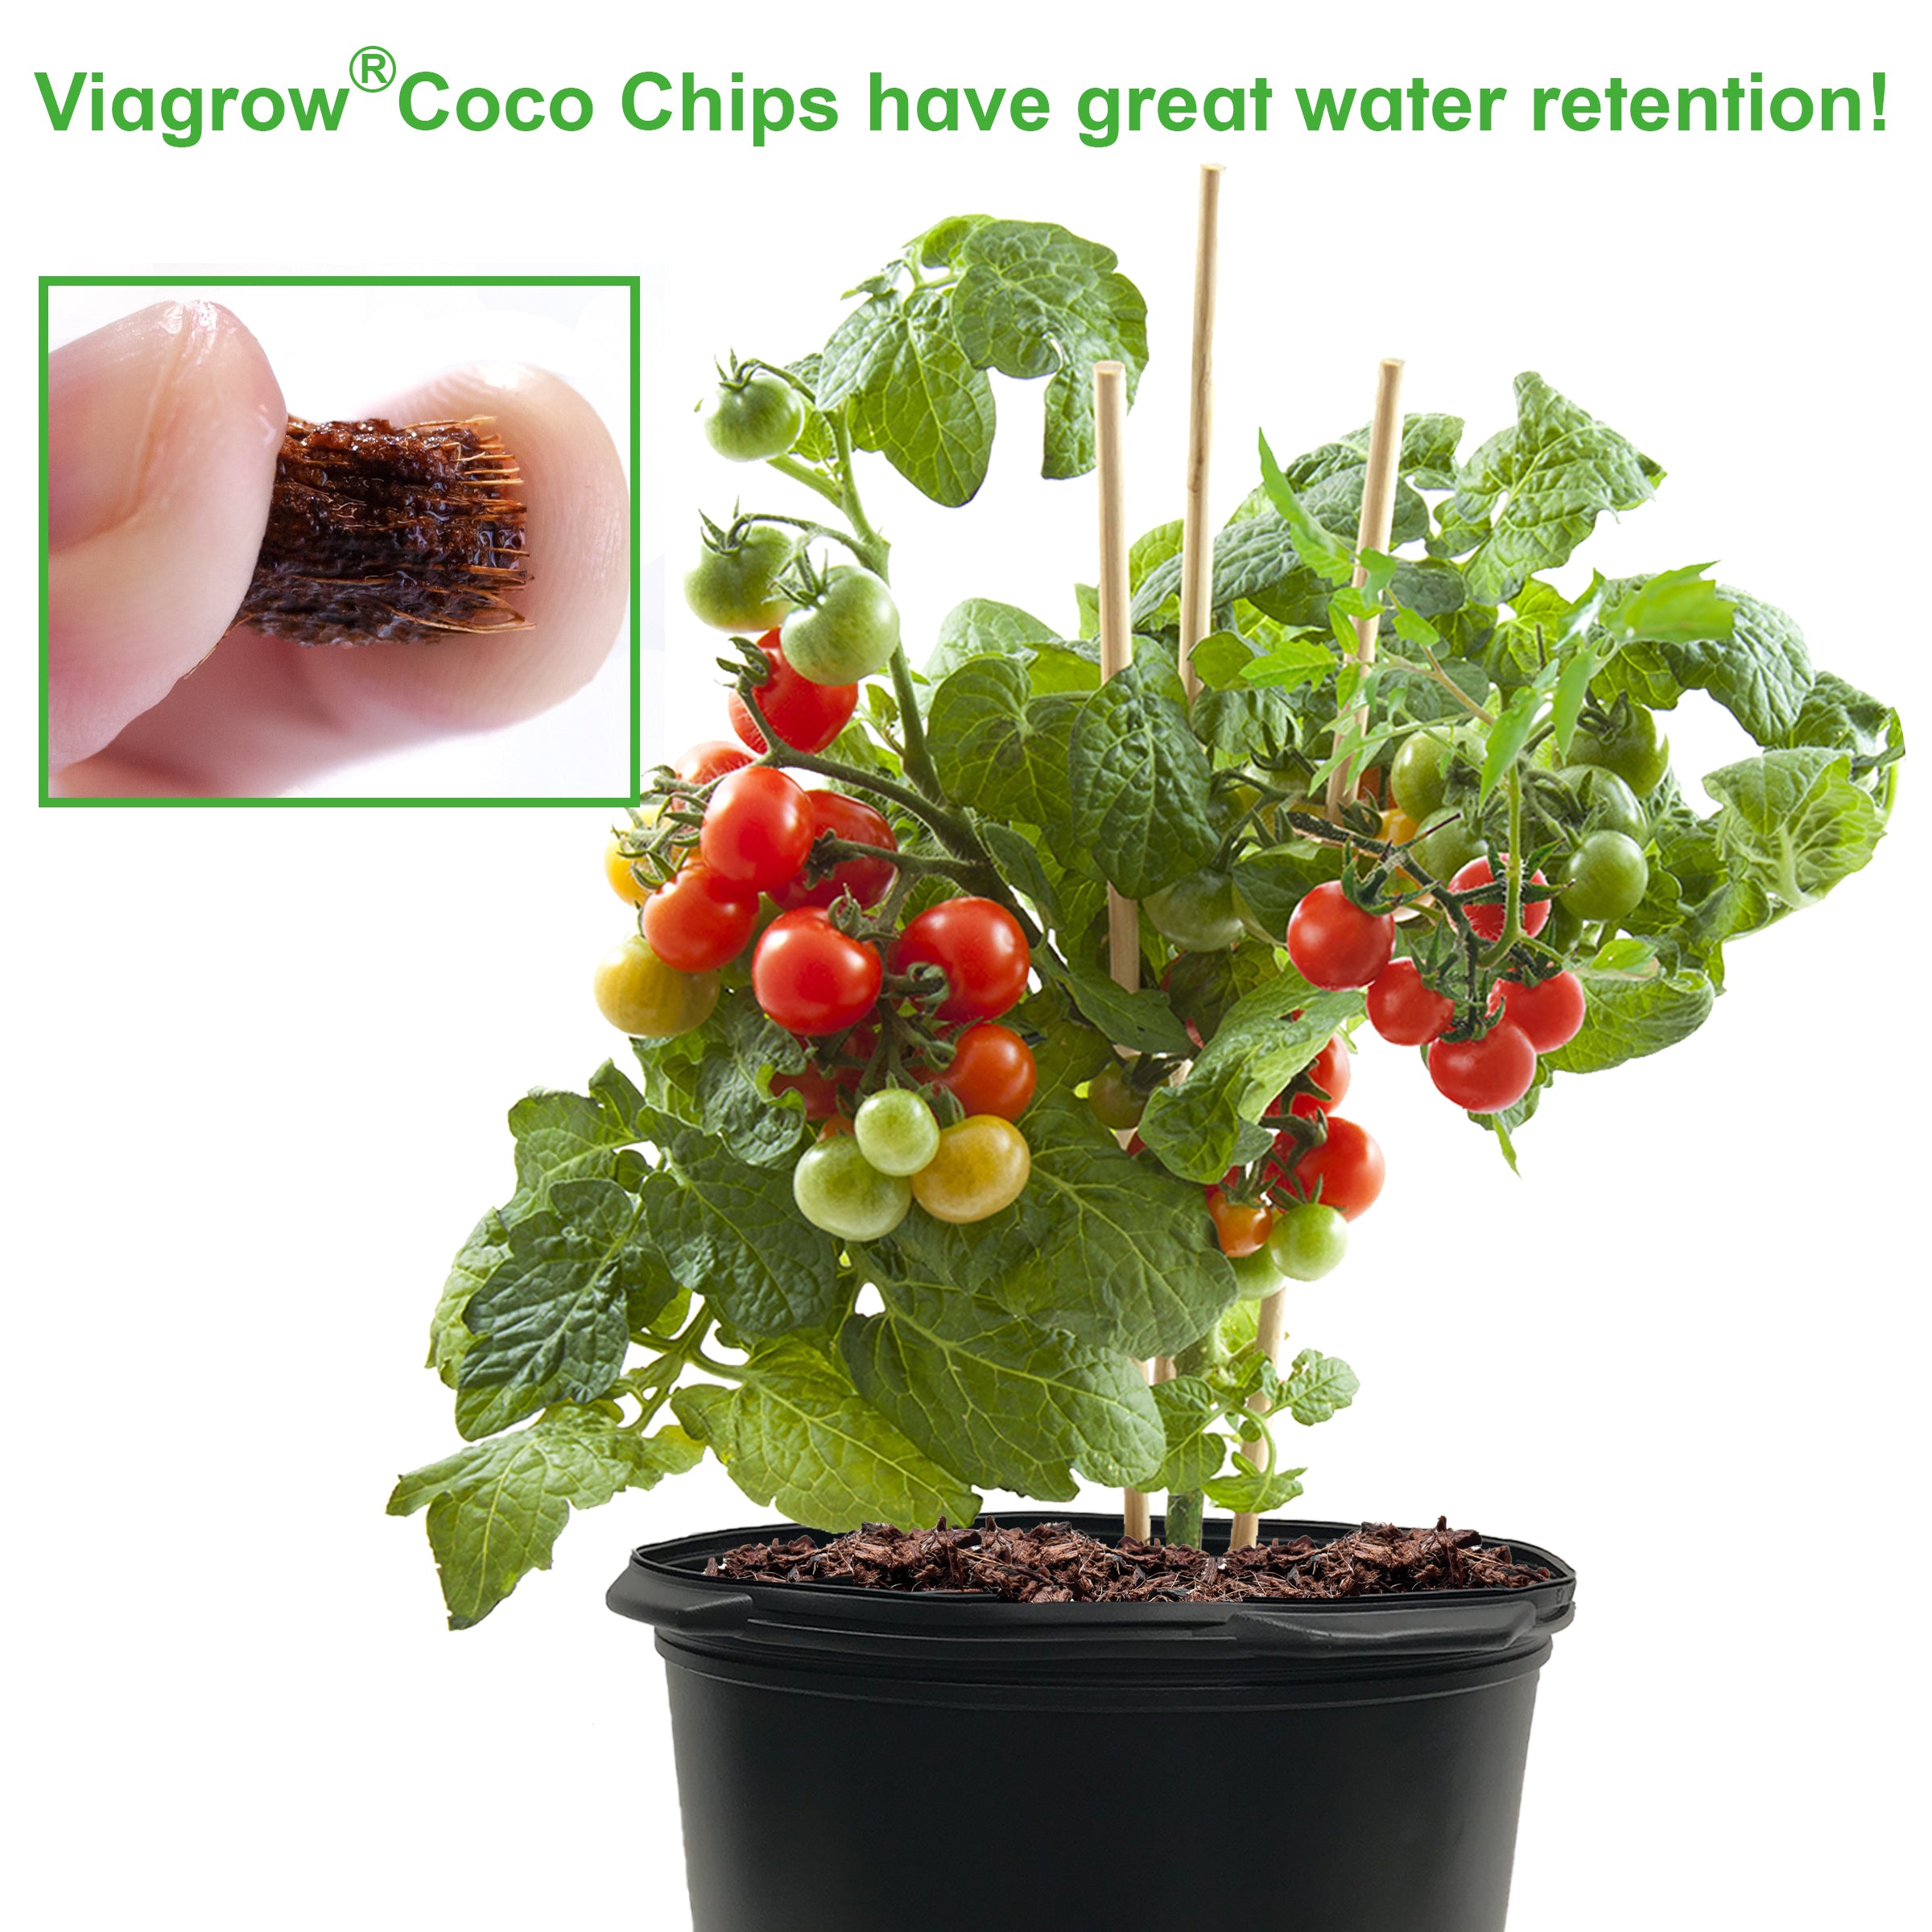 Viagrow 1.75 cu. ft. Coco Coir Chips, Premium Reptile Substrate Bedding 52 qt. / 50 L / 13 Gal. (2-Pack)